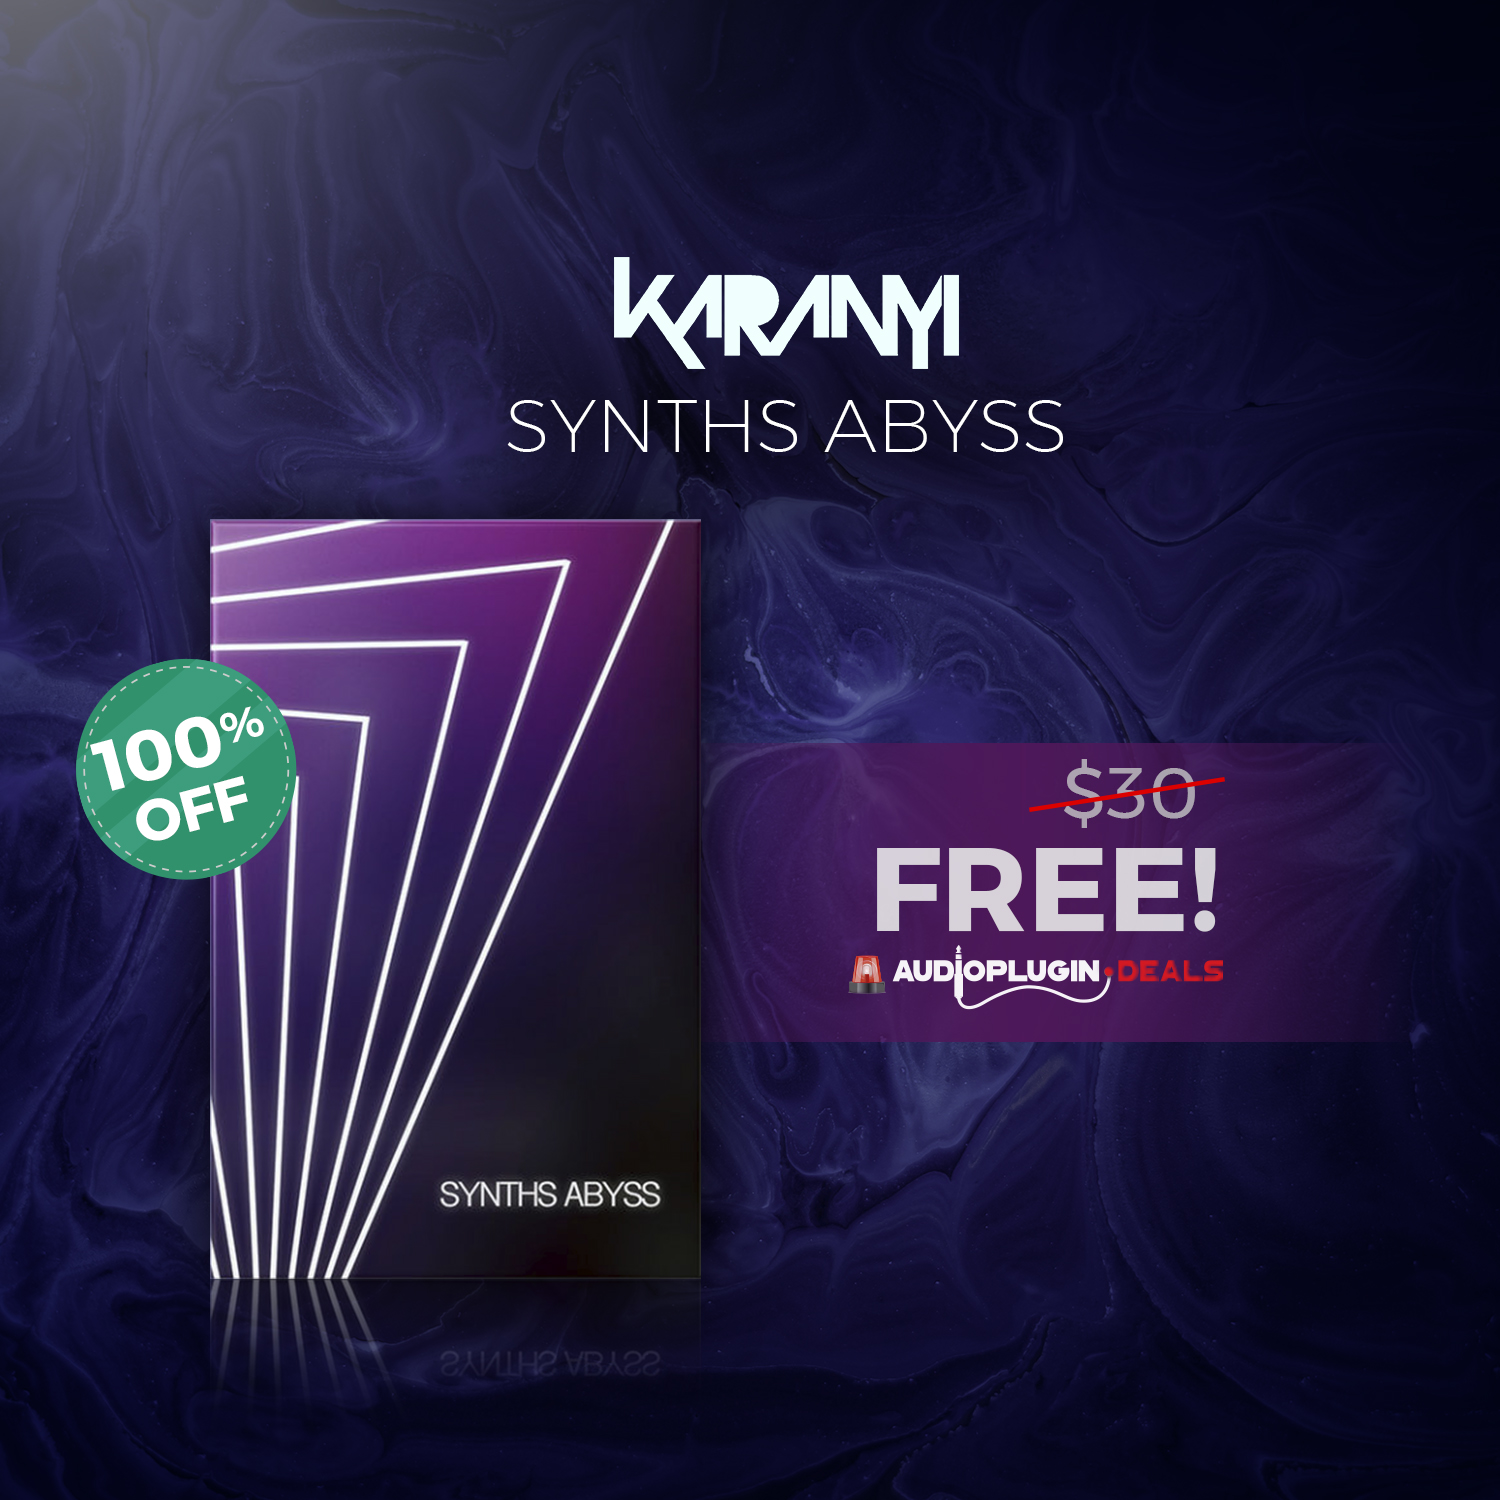 (100% off) Synths Abyss by Karanyi Sounds